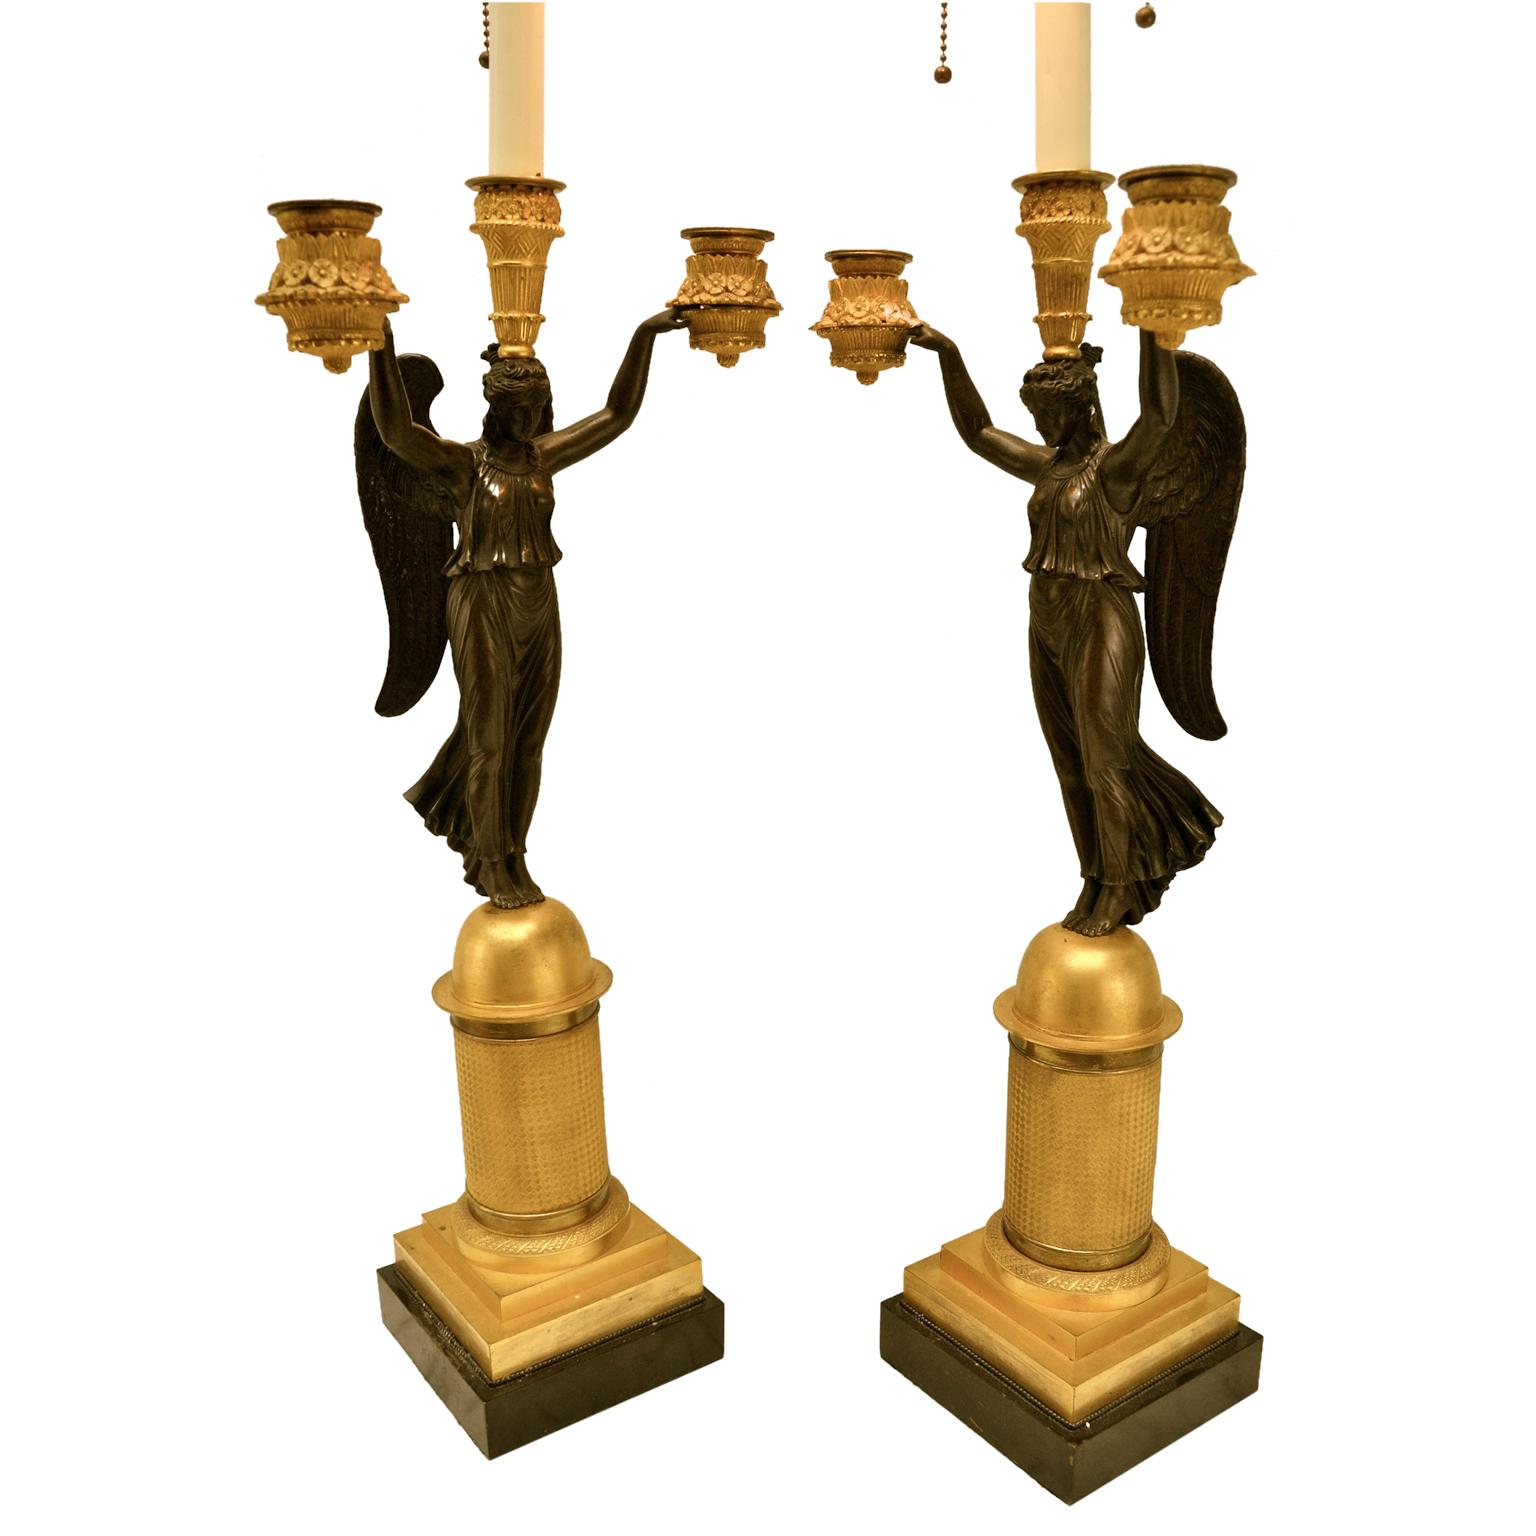 Gilt Pair of Bronze French Empire Victory Candelabra Lamps